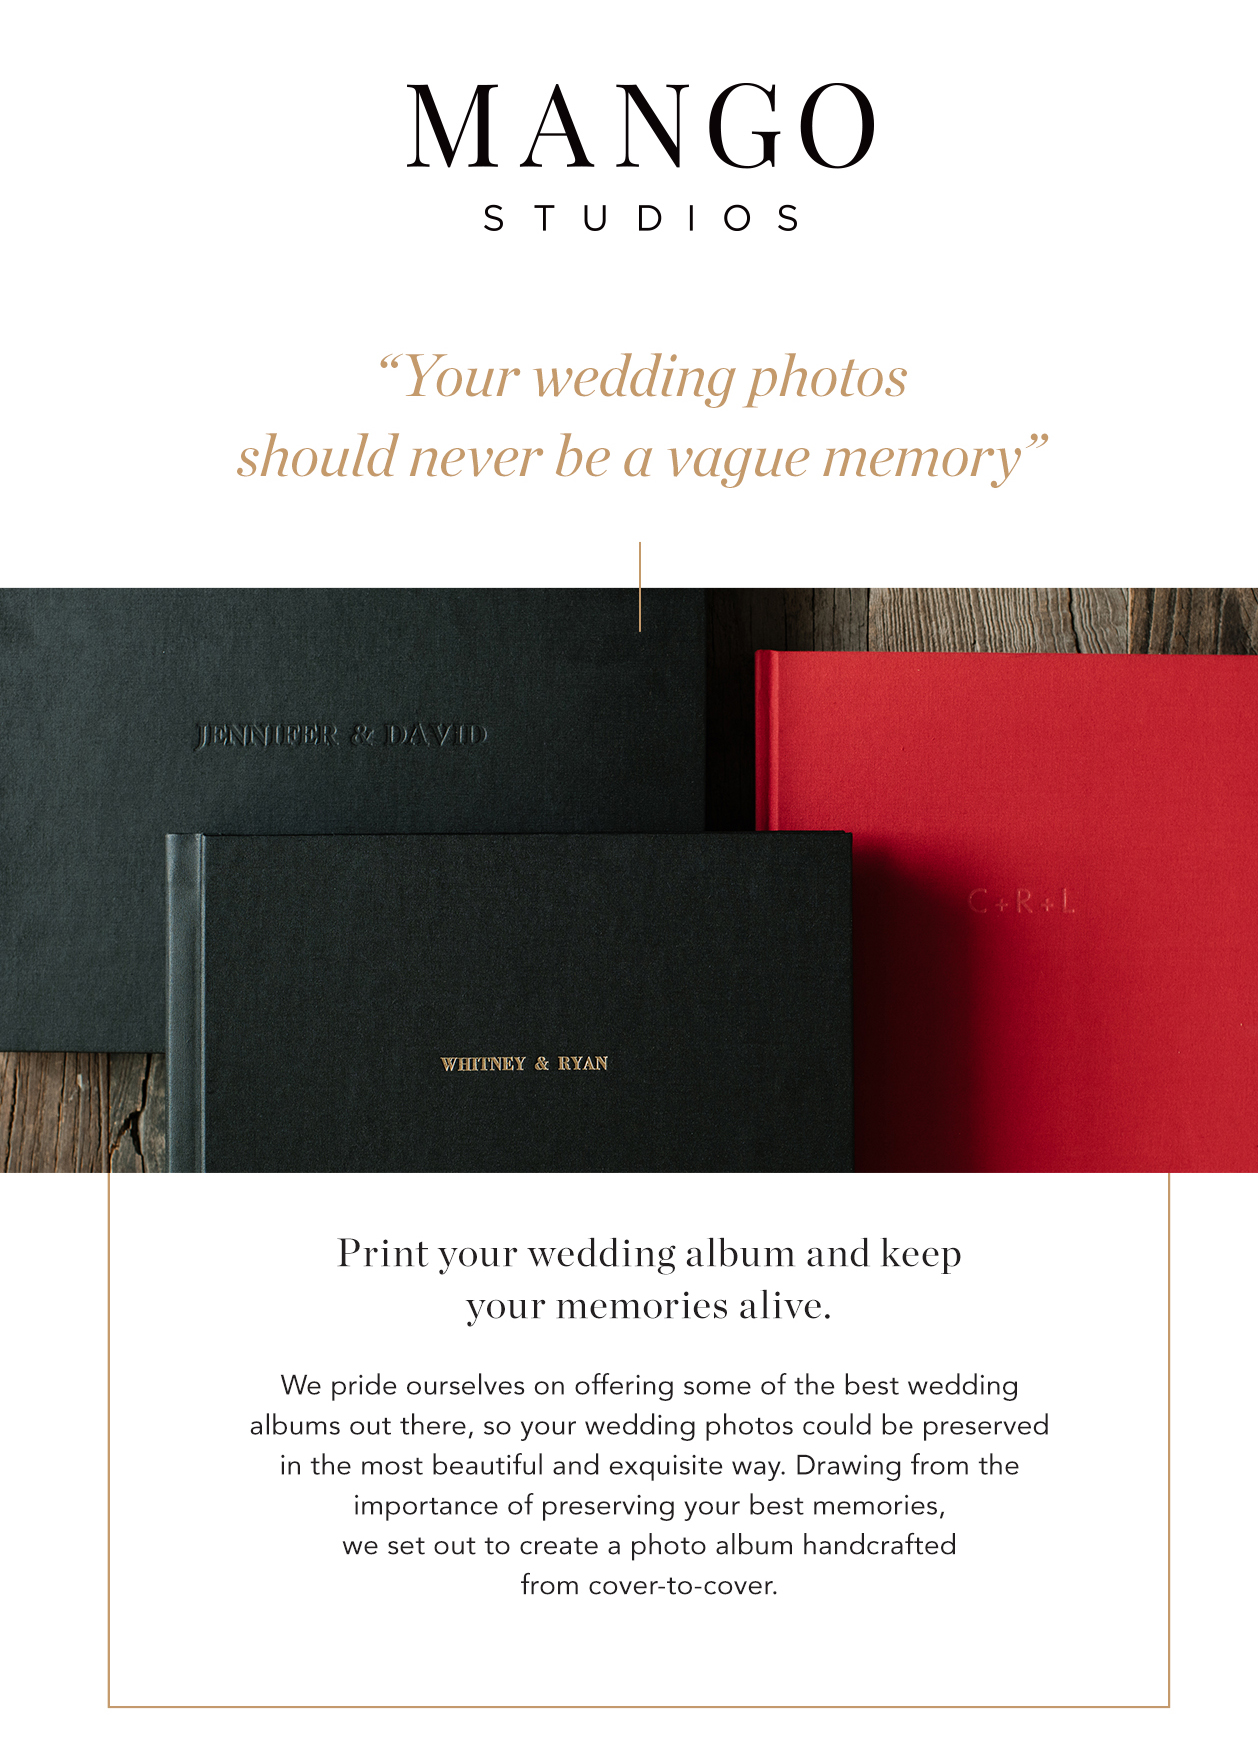 Why you should invest in a printed Mango Studios wedding album